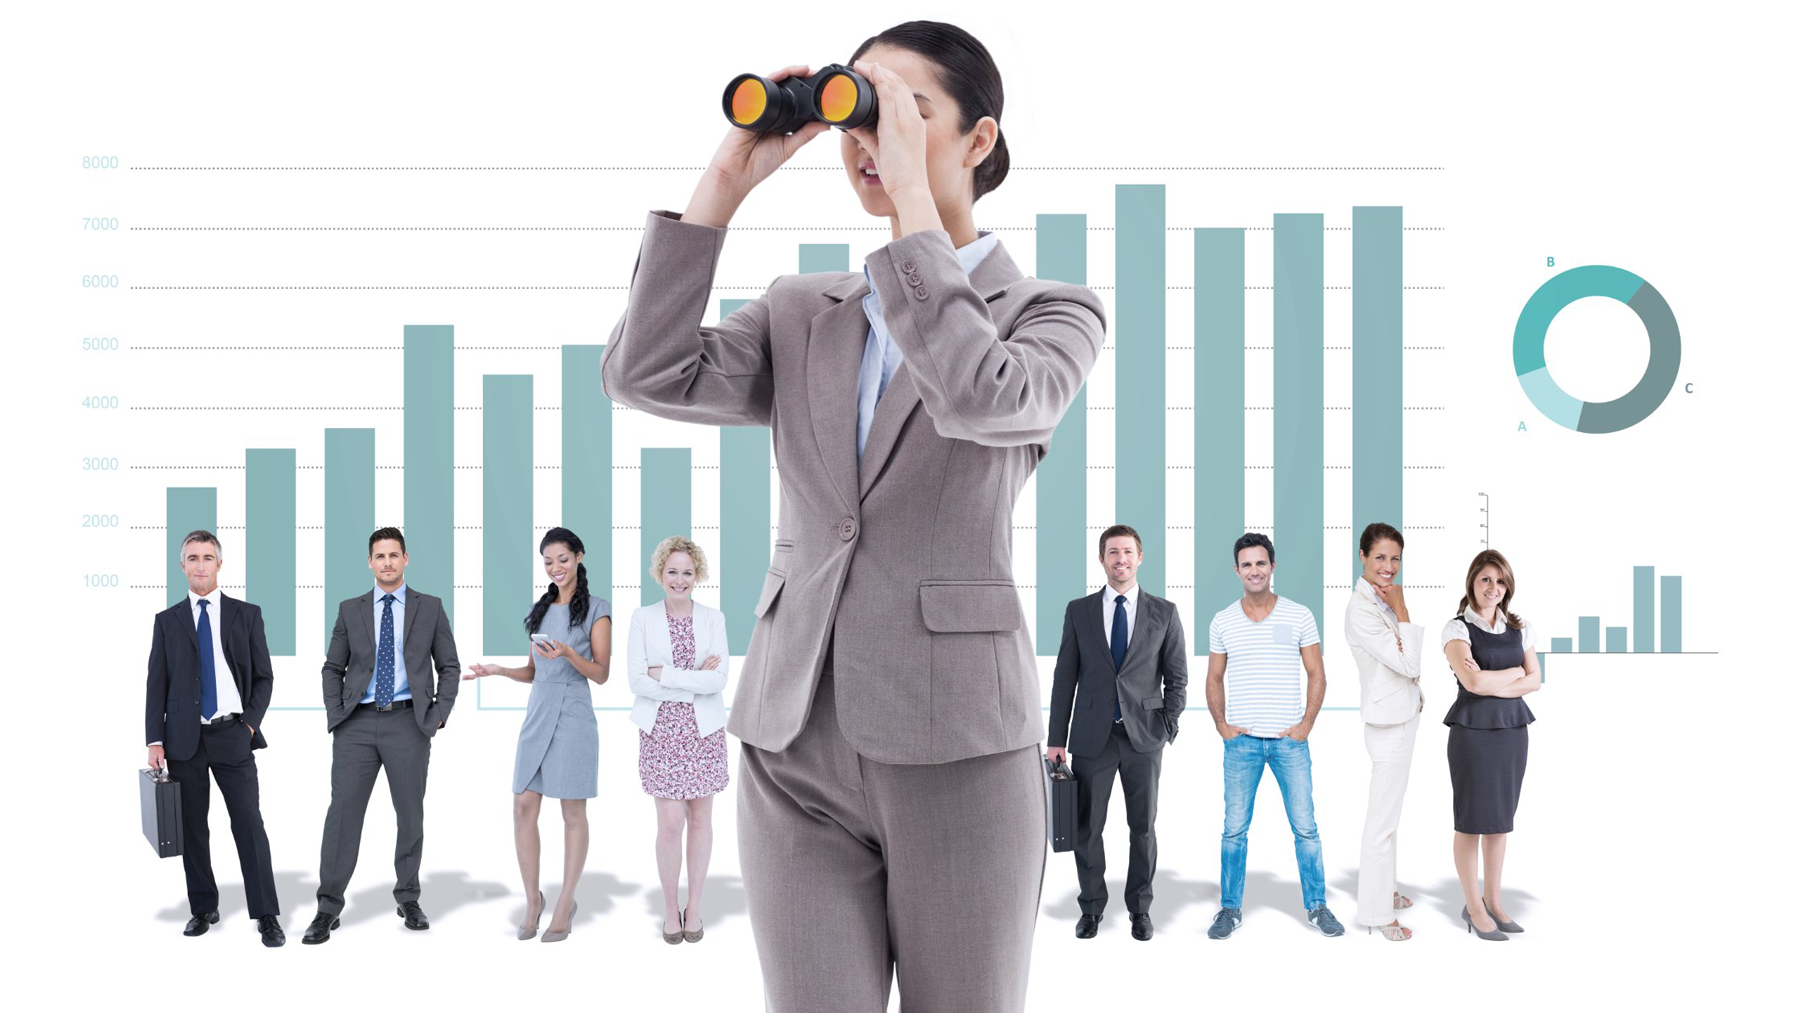 stock image brunette businesswoman looking through binoculars against business interface with graphs and data